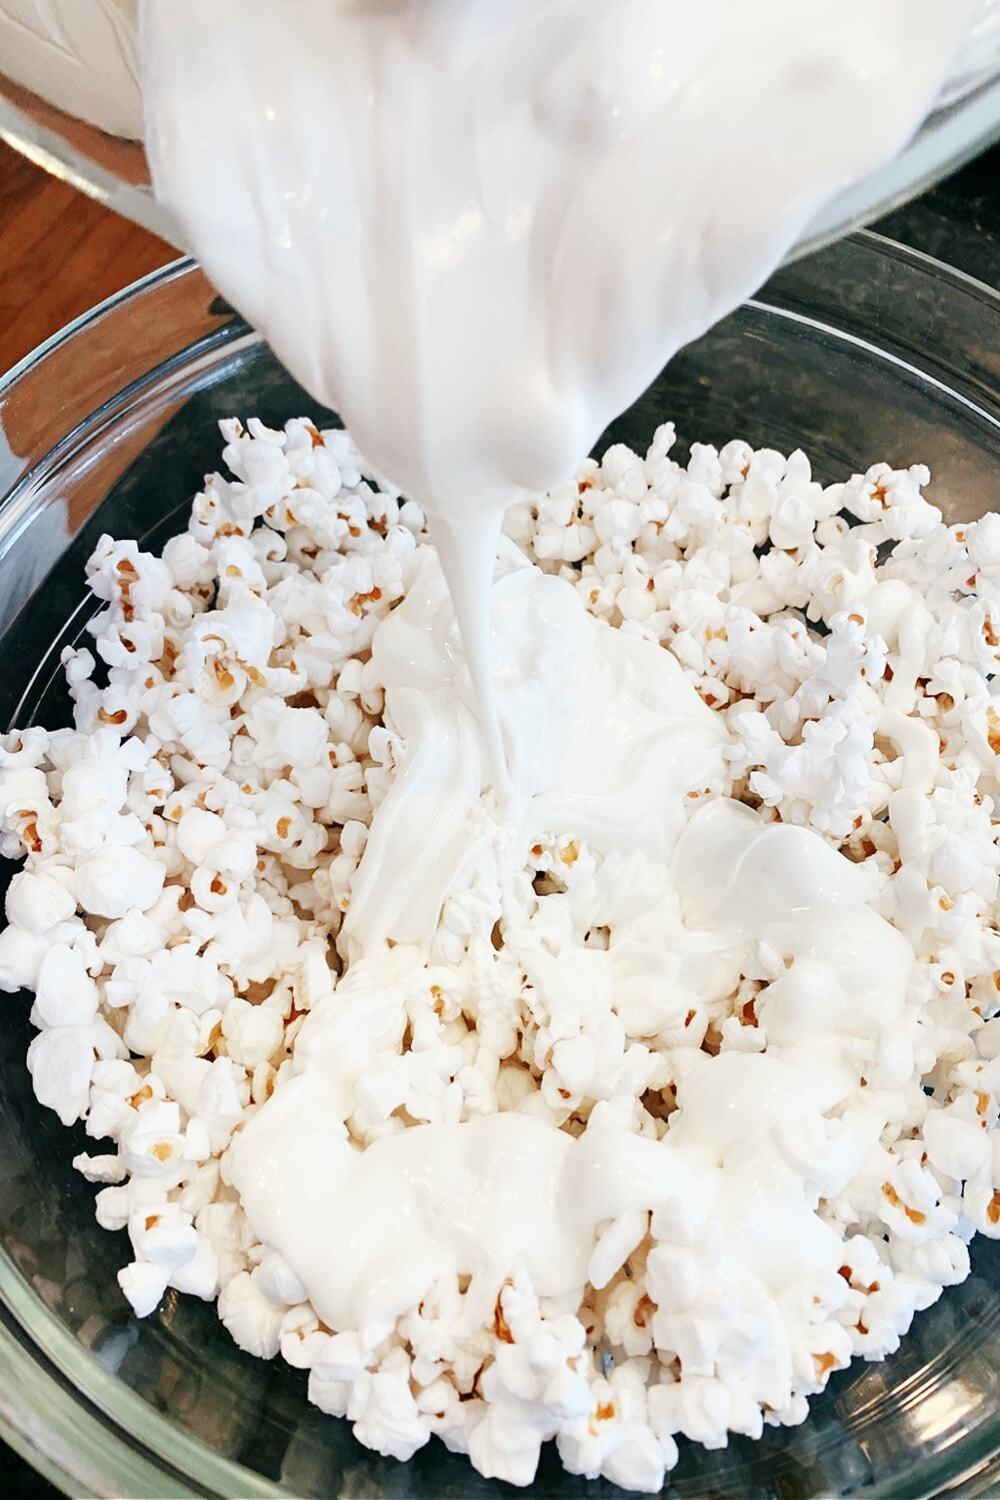 How To Make White Chocolate Covered Popcorn Recipe melted white chocolate poured over white popcorn in a big mixing bowl